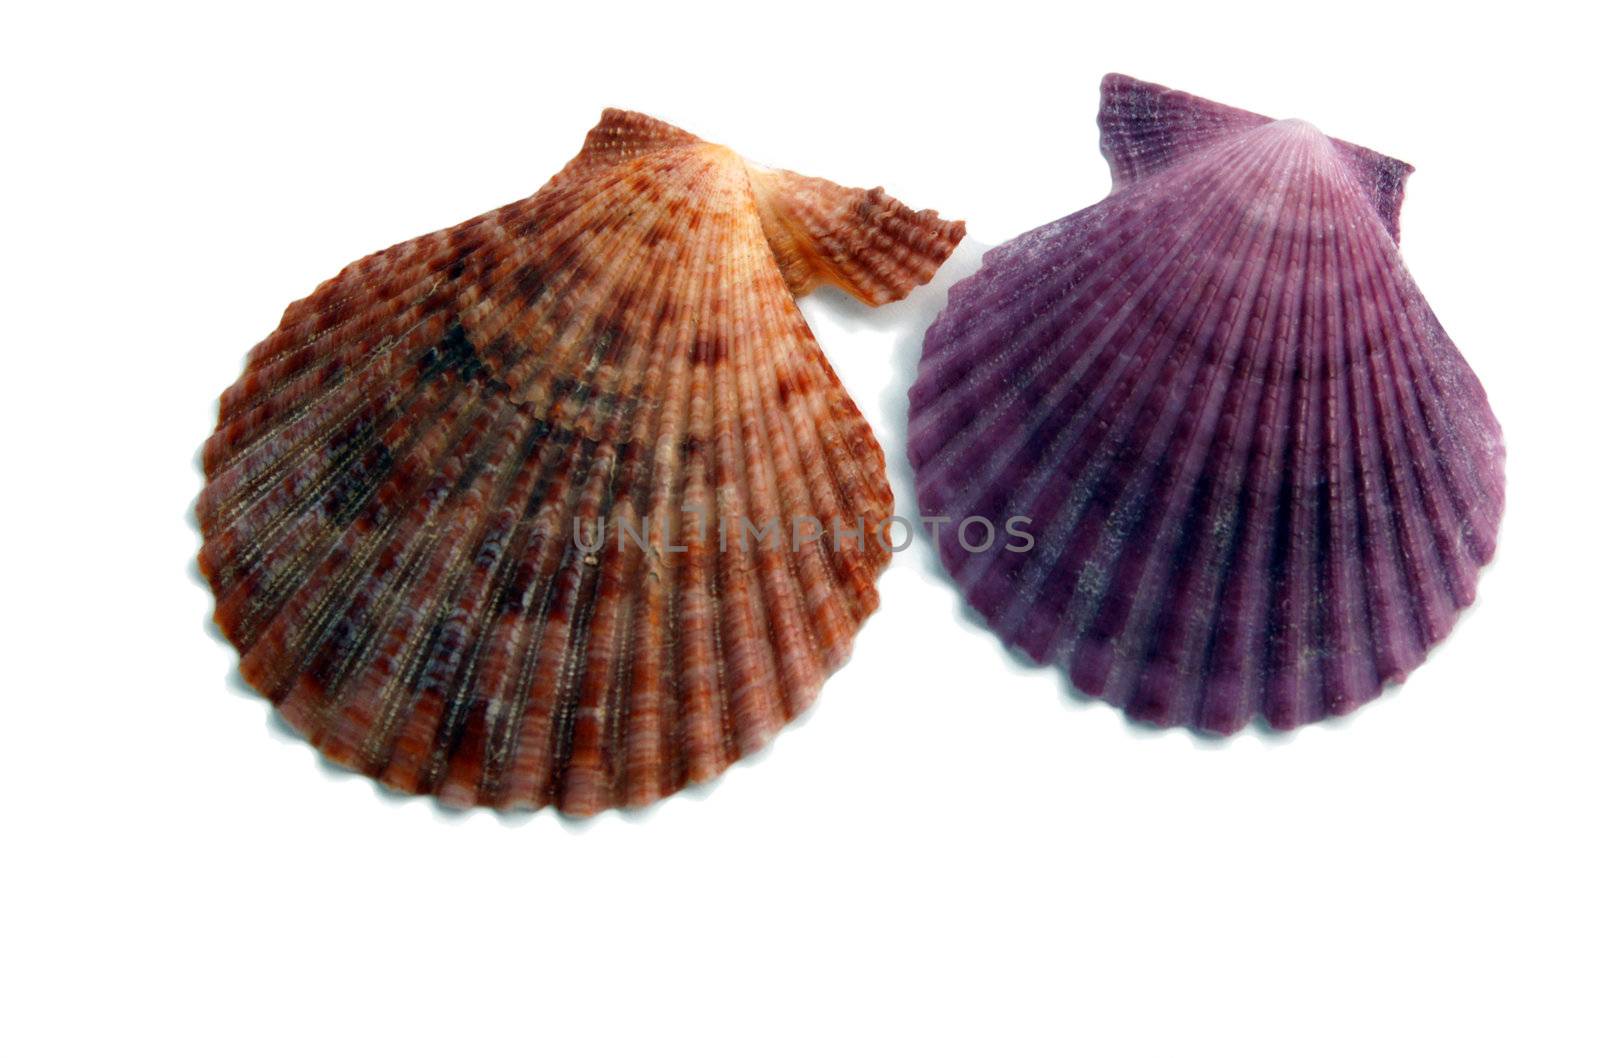 colored shells by mettus